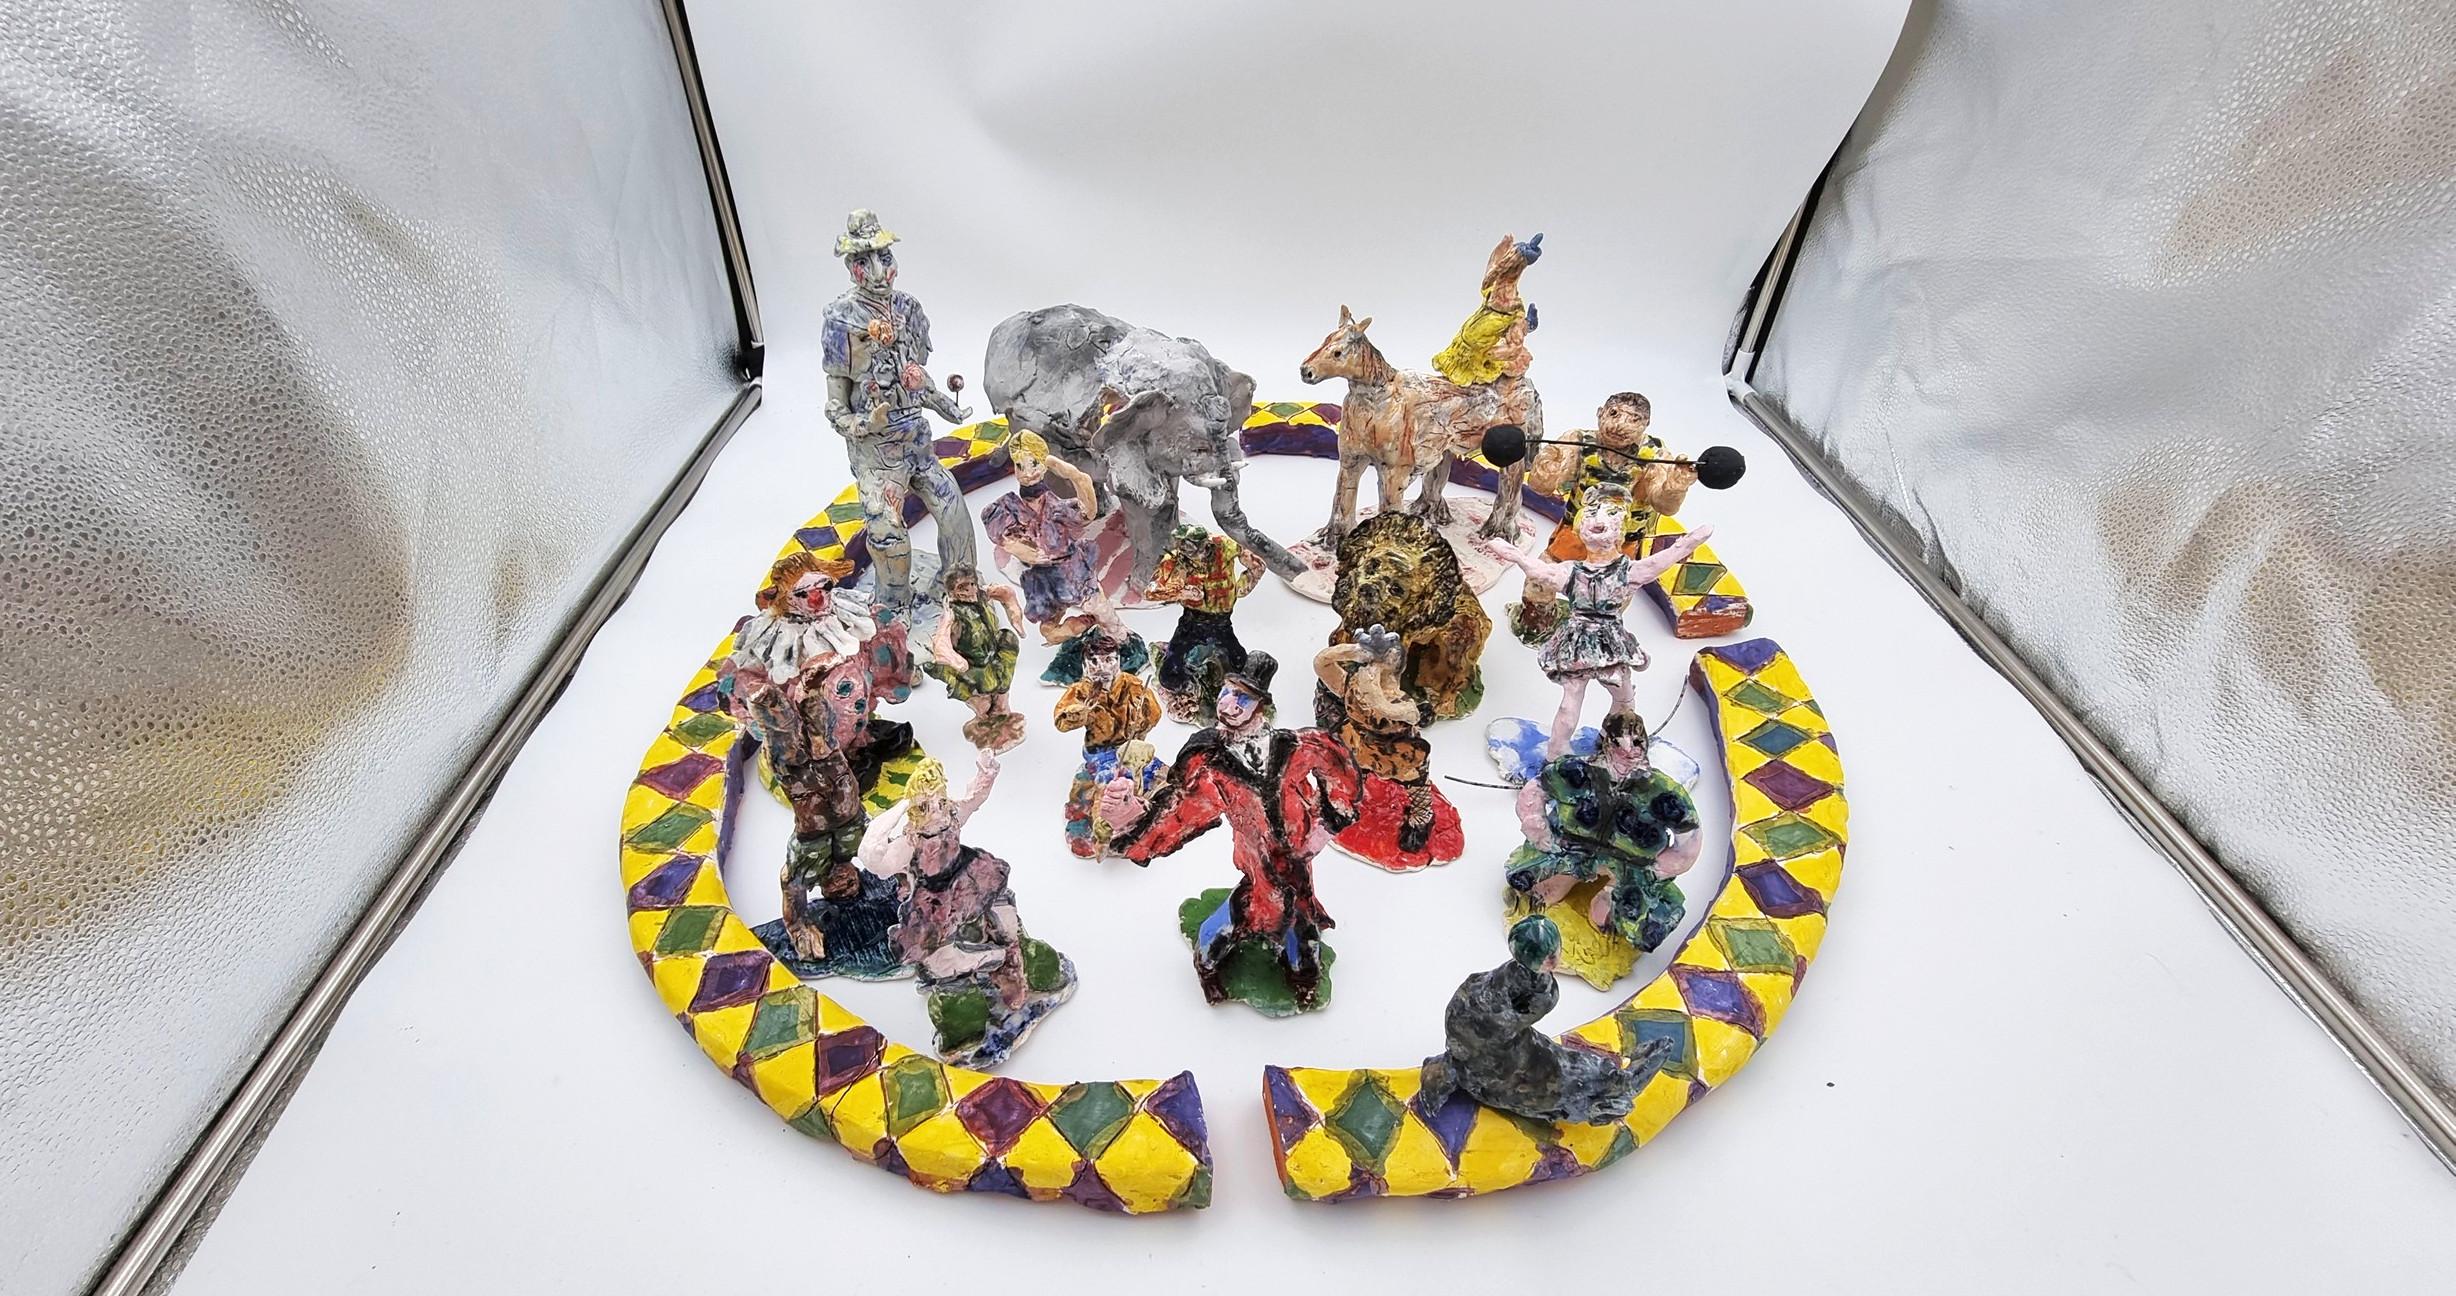 Ann Rothman
Circus Set (Circus, Whimsical, Viola Frey, Delicate, Playful, Fun, Cirque du Soleil, The Ringling Bros., Barnum & Bailey)
2021-2022
Porcelain, Low Fire Glazes, Crayons, Watercolors
Fired Cone 06, 04
COA provided
Ref.: 924802-882

Tags: